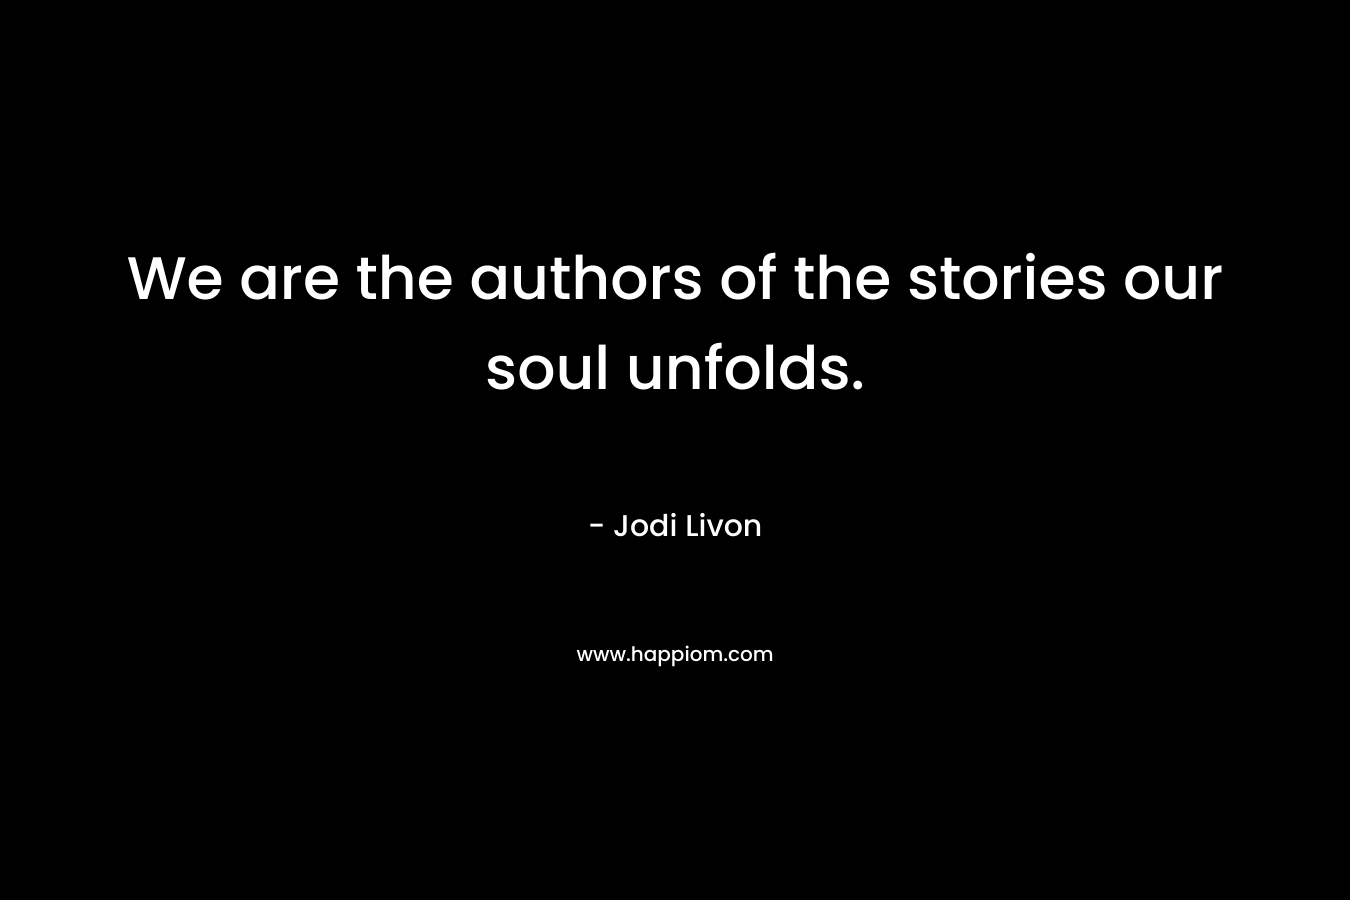 We are the authors of the stories our soul unfolds. – Jodi Livon